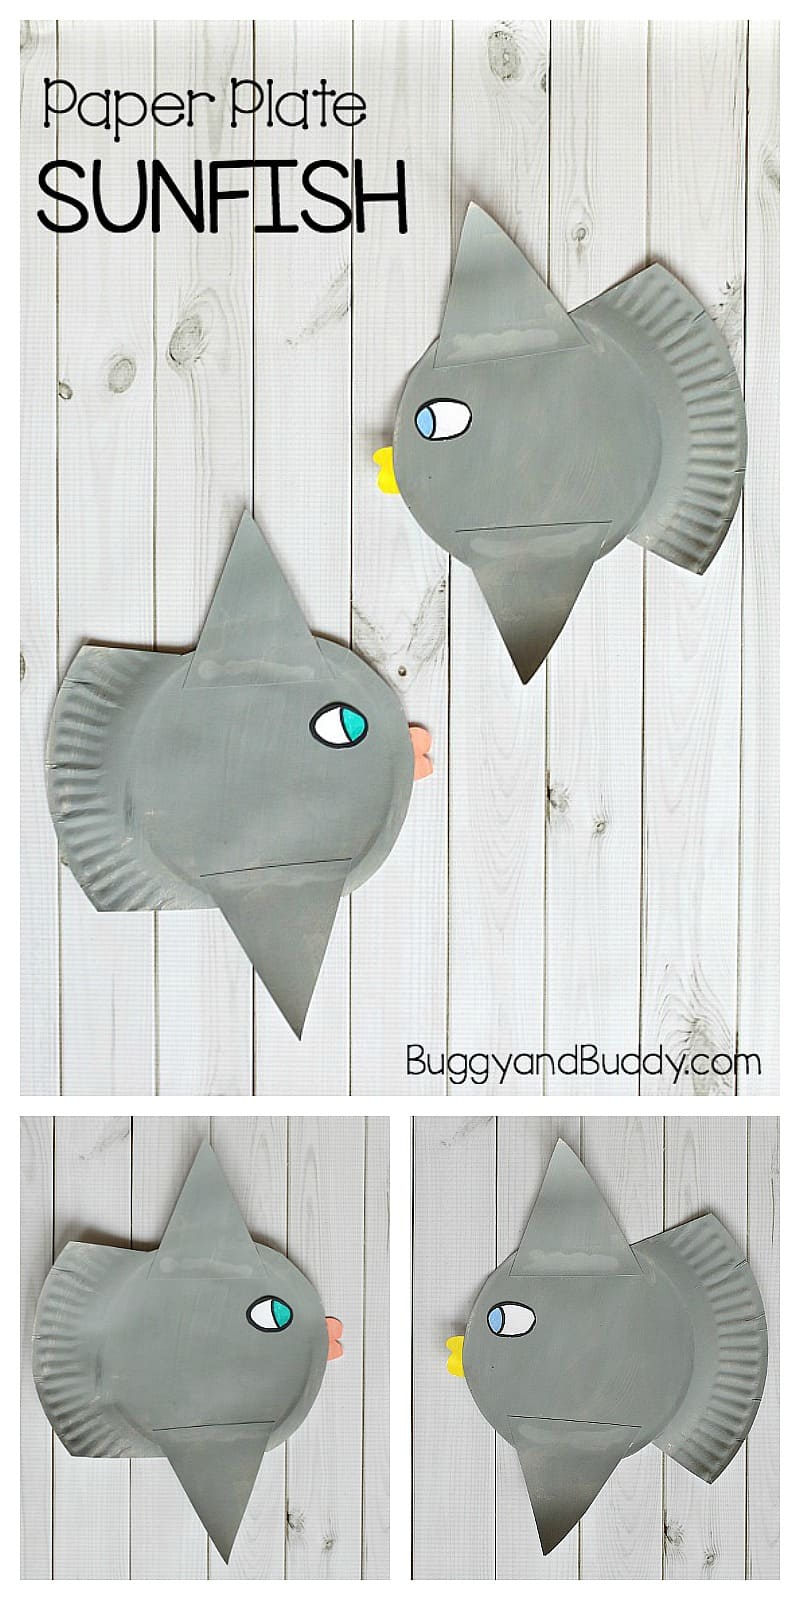 paper plate sunfish craft for kids- sunfish or mola fish